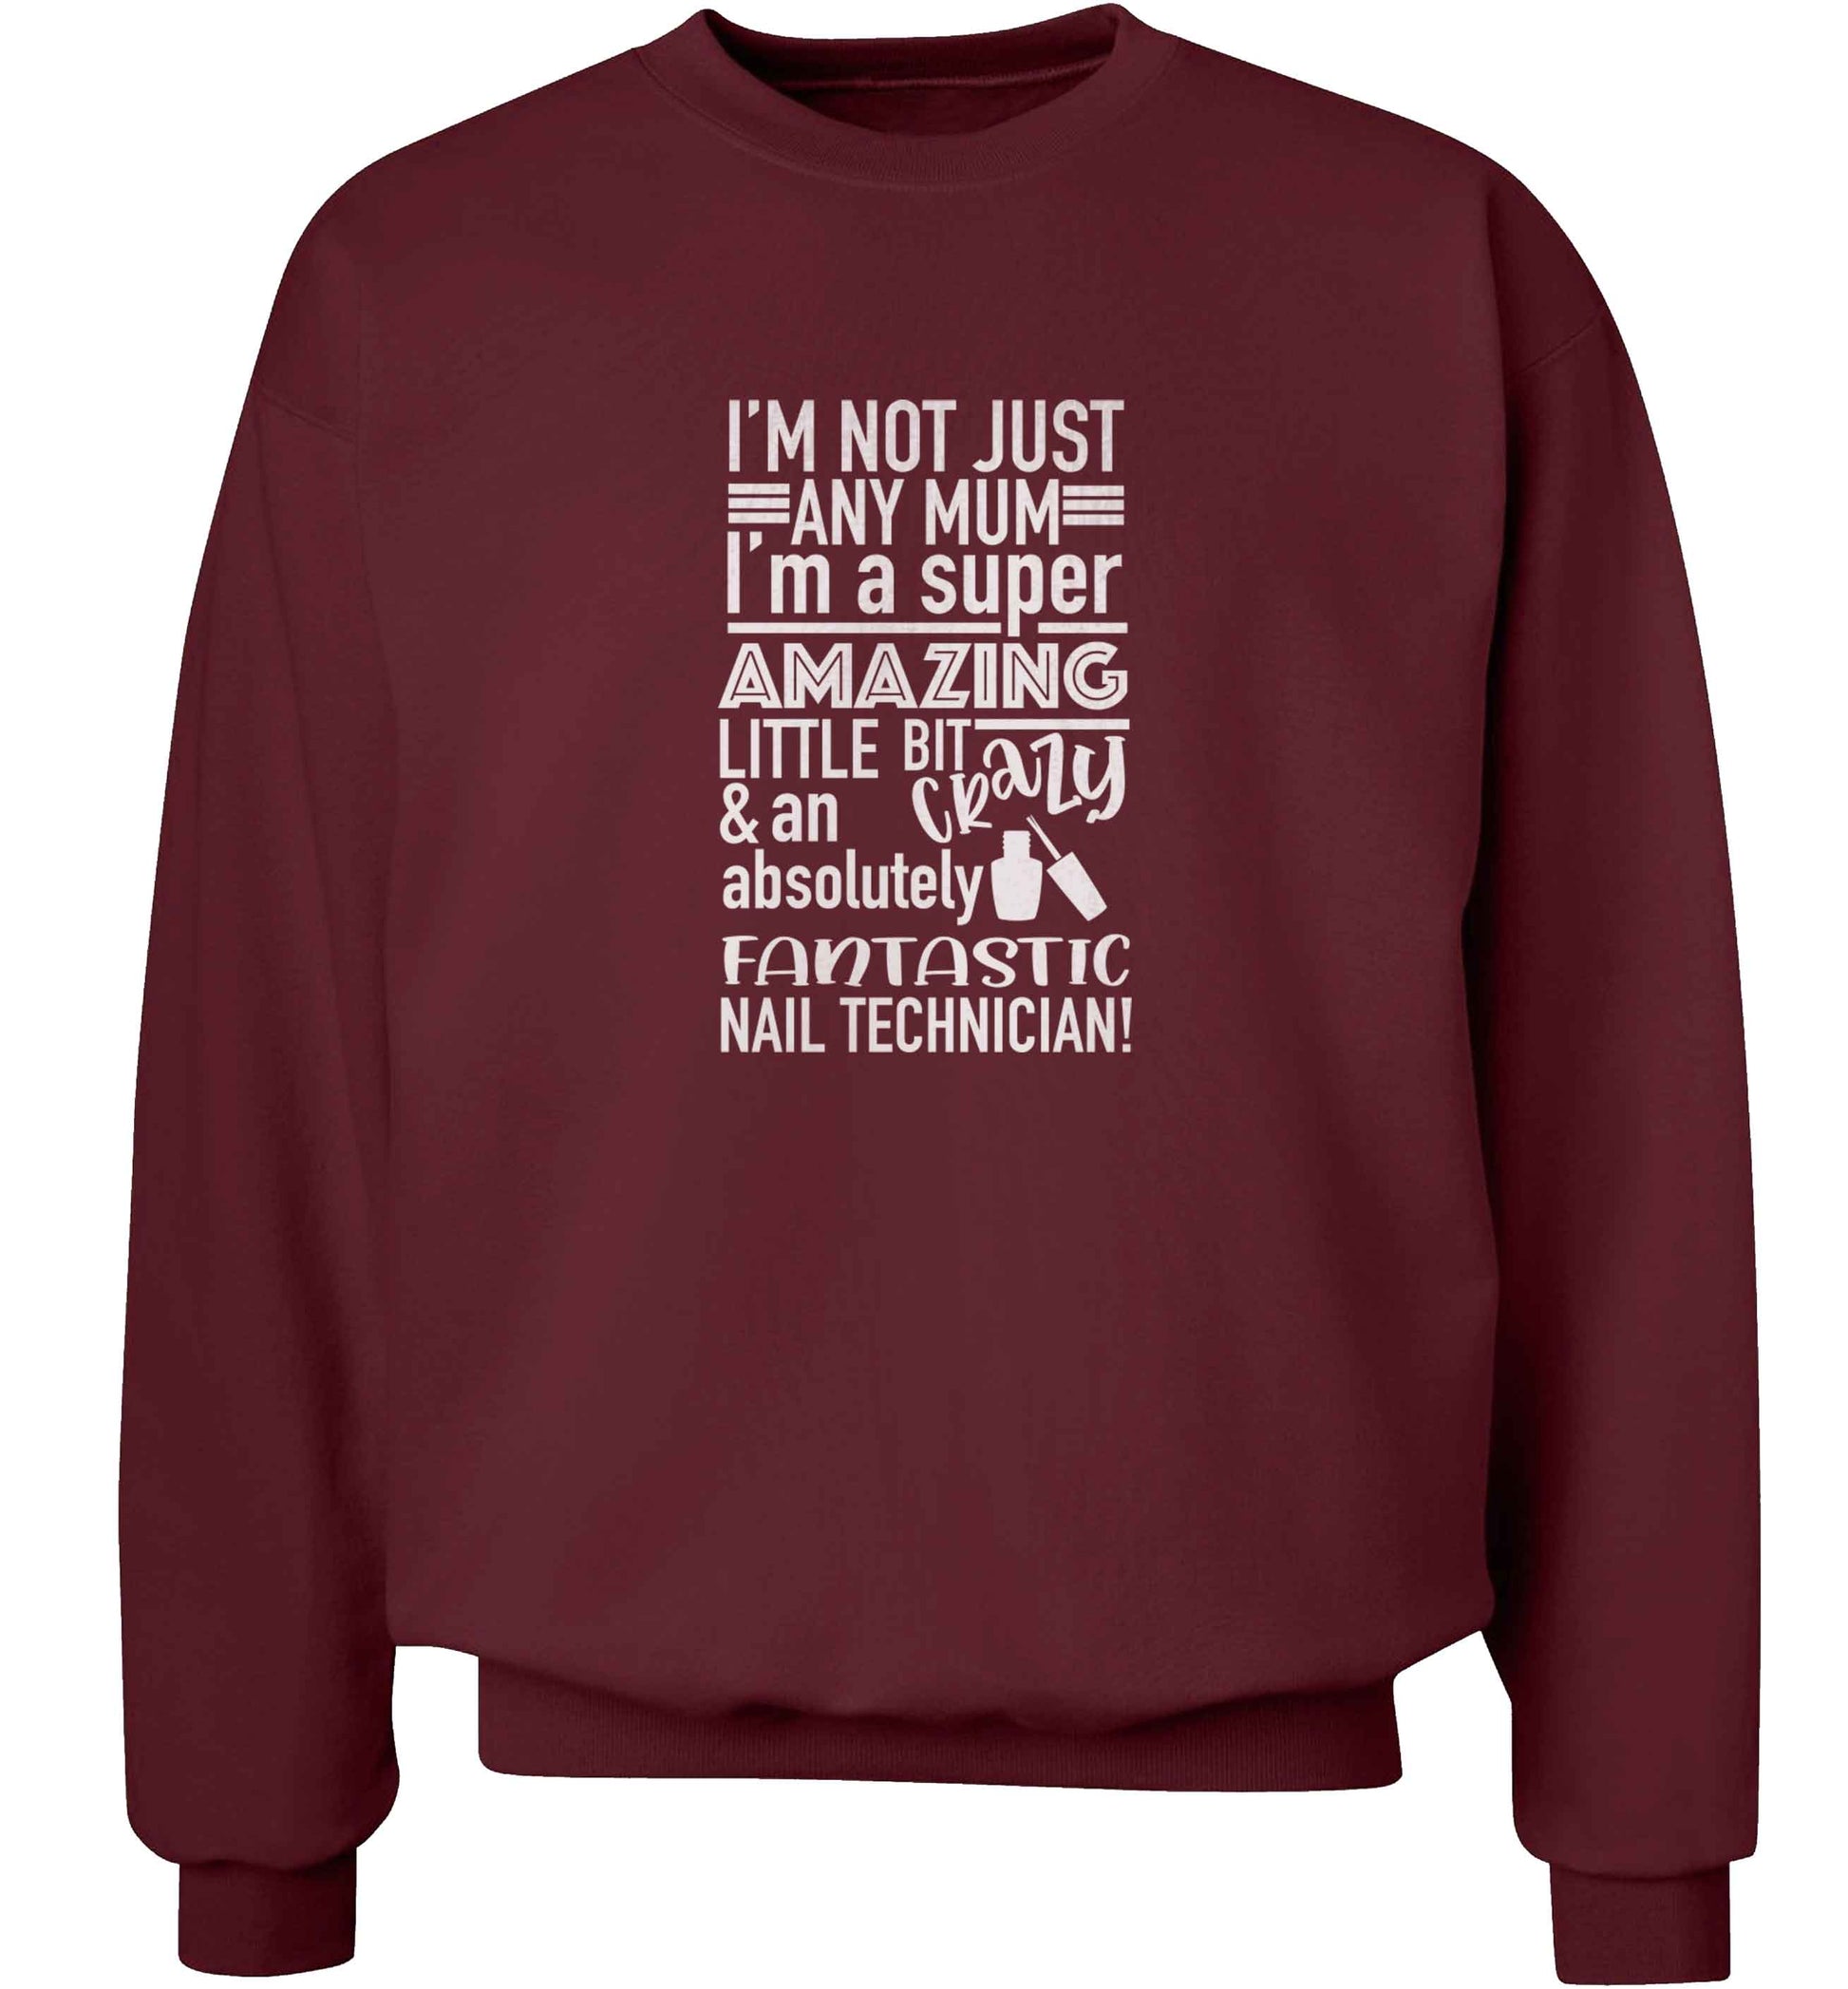 I'm not just any mum I'm a super amazing little bit crazy and an absolutely fantastic nail technician! adult's unisex maroon sweater 2XL